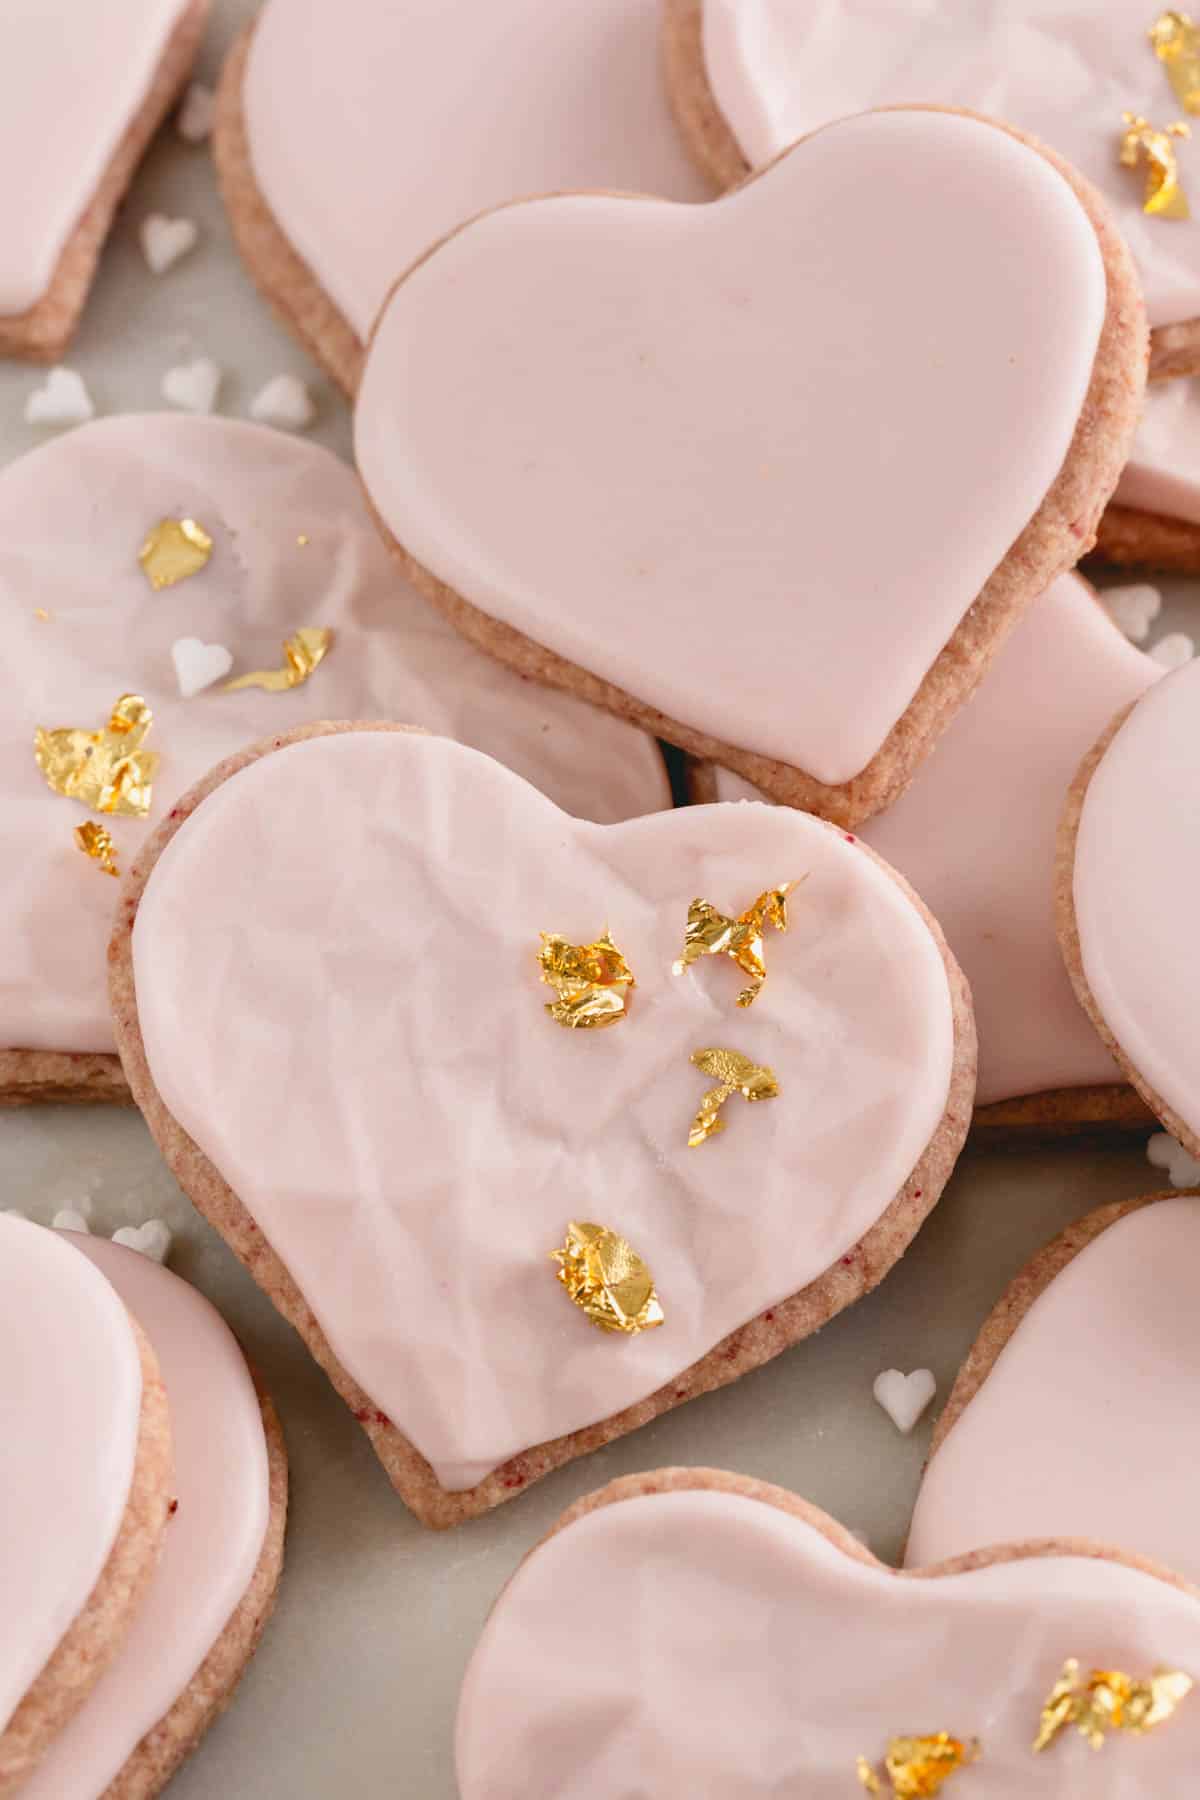 Heart-shaped raspberry sugar cookies with smooth and textured icing and gold leaf decorations.